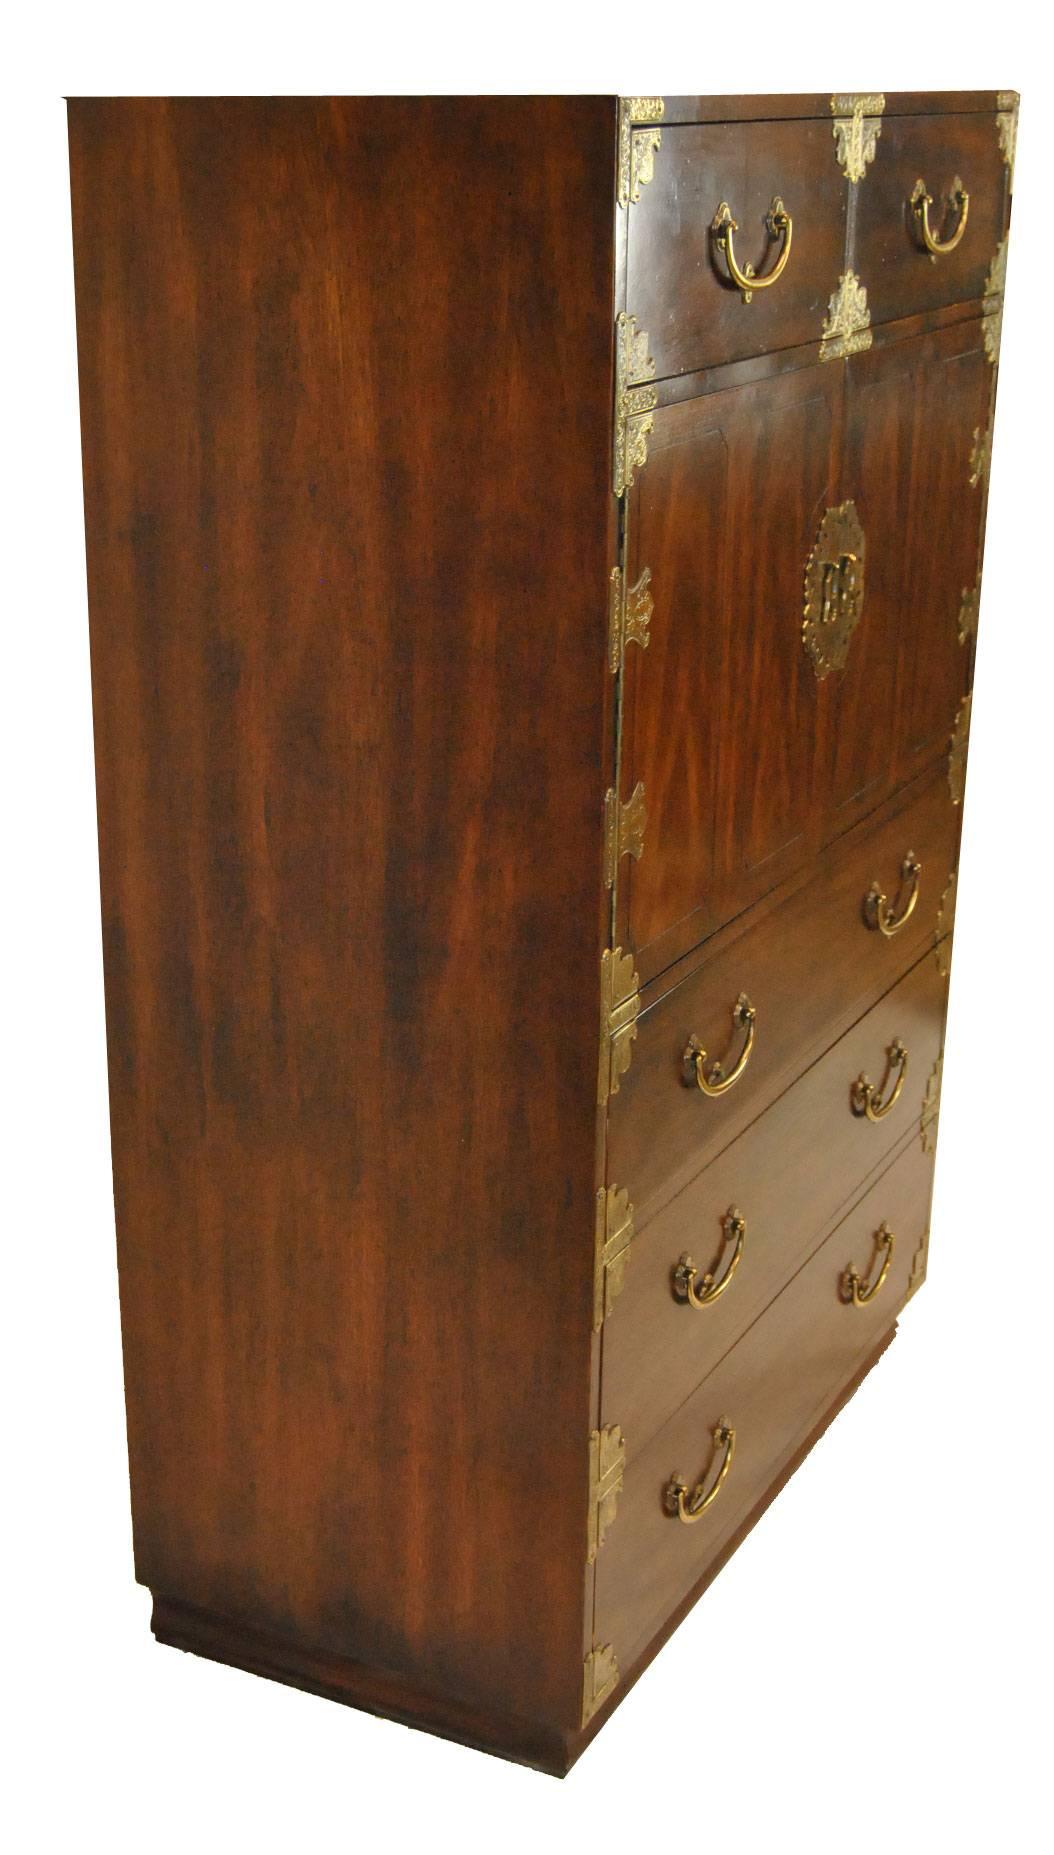 A great dark stained mahogany gentlemen's chest by Henredon. The chest features five dovetailed drawers and a two-door storage area. The storage area has one shelf dividing and there are four removable dividers that can be used for added